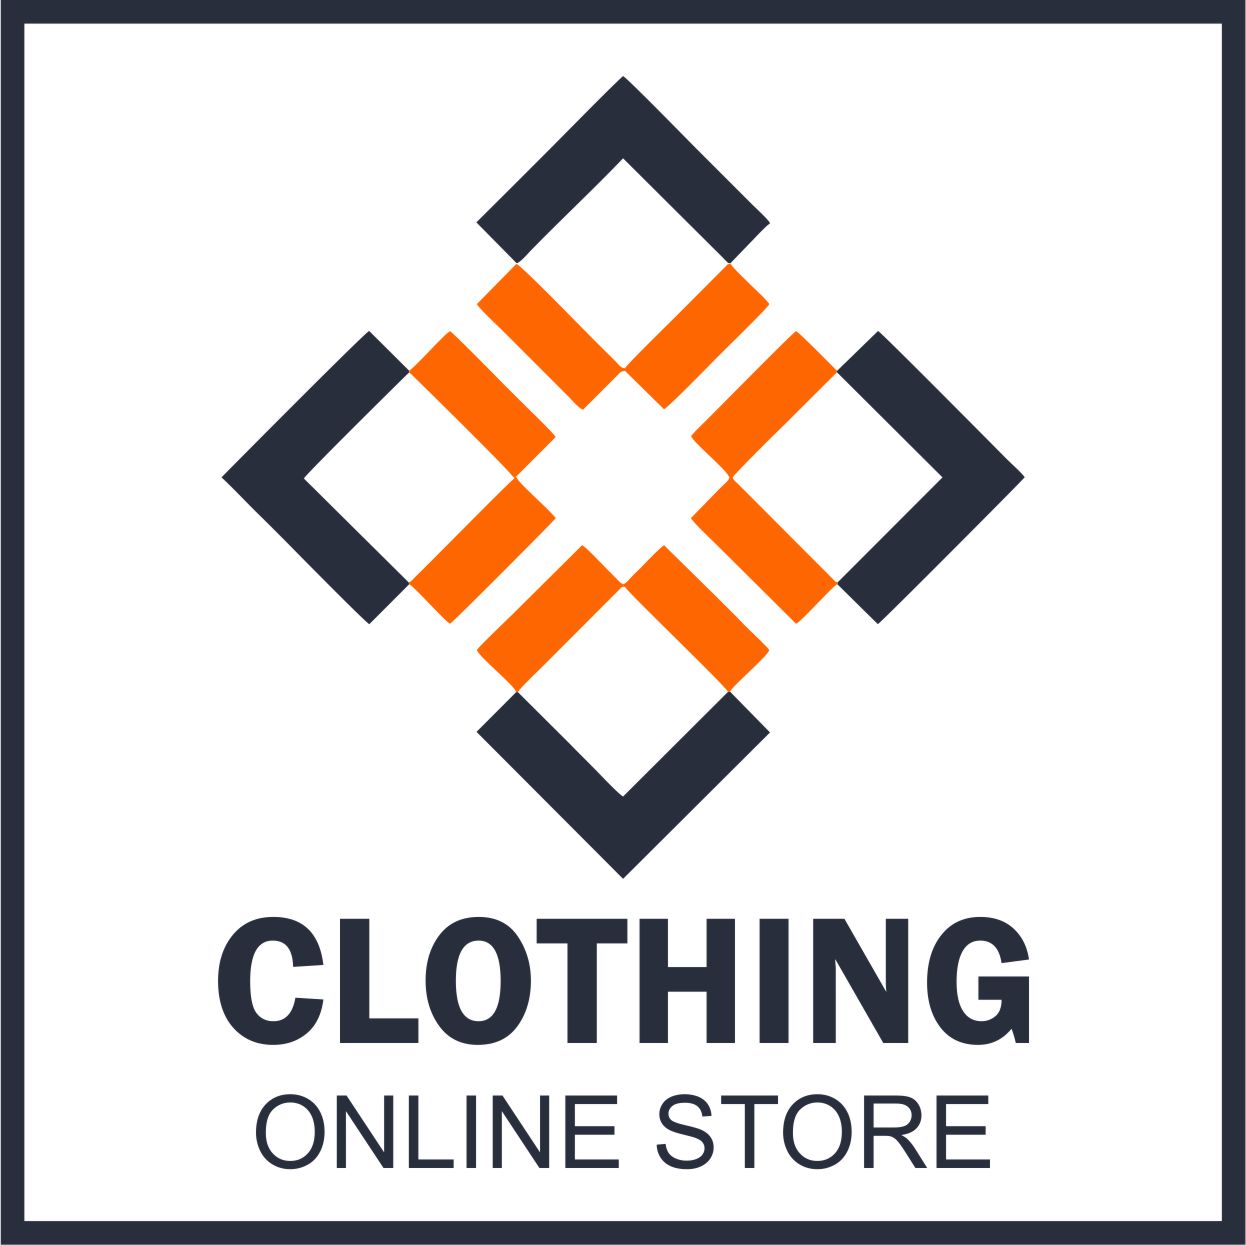 Clothing Online Store